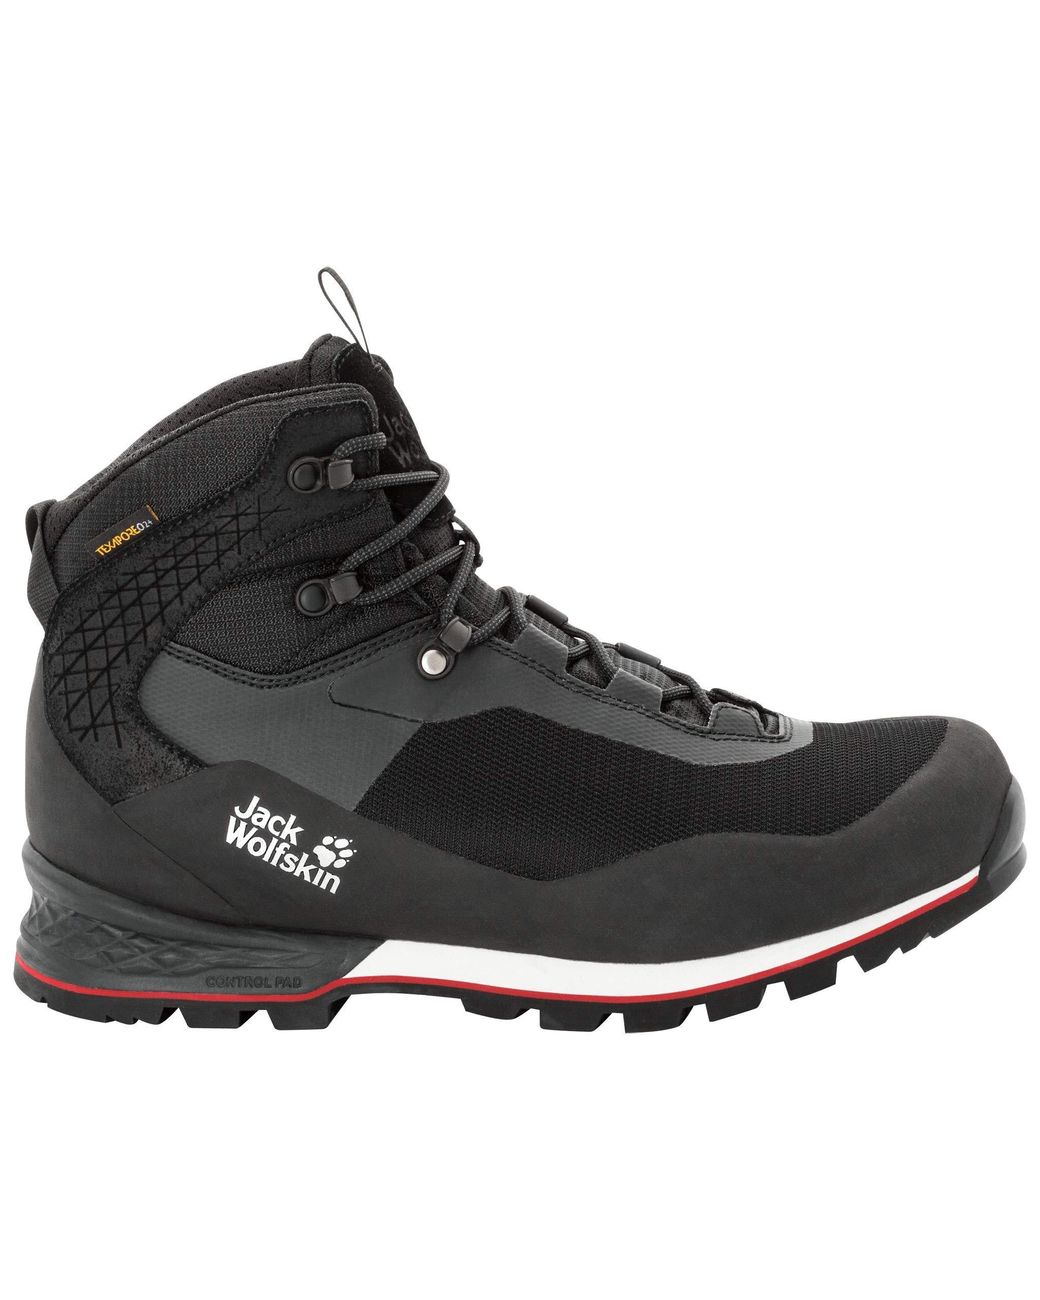 Jack Wolfskin Synthetic Texapore Mid M Hiking Boot in Black/ Red (Black) Men - Save 30% - Lyst